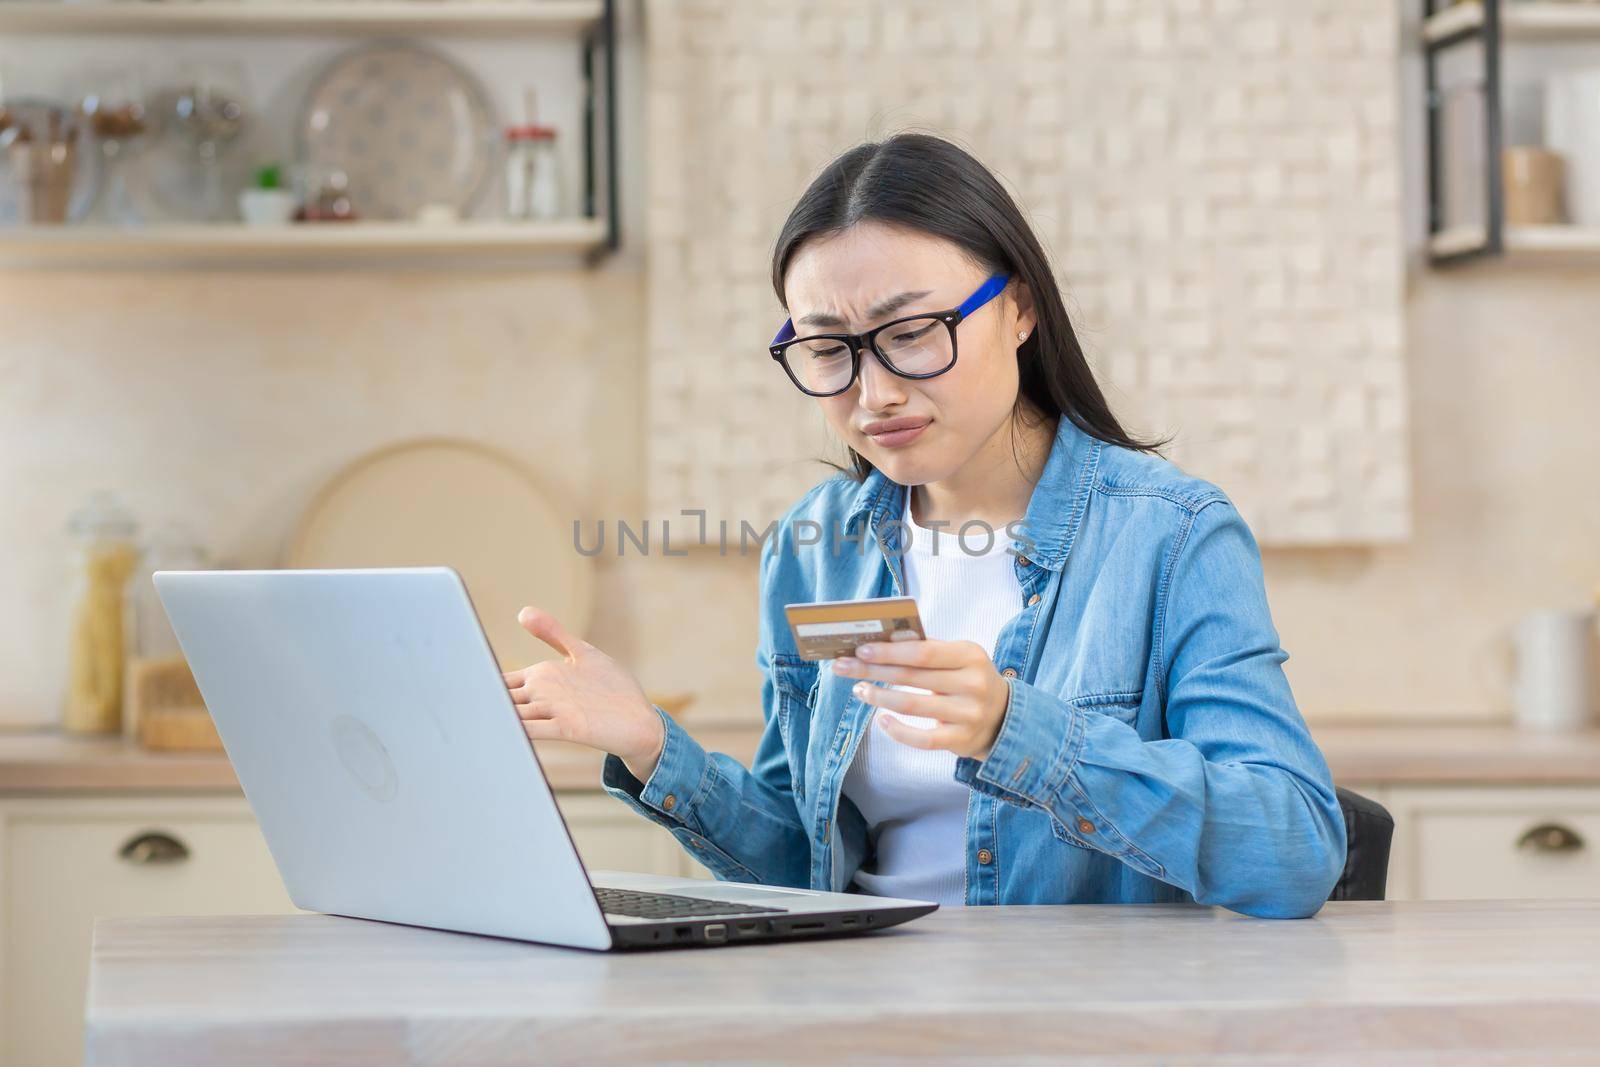 Upset and sad woman in depression trying to make online purchase in online store, Asian woman sitting at home in kitchen using laptop and bank credit card, unable to make payment online by voronaman